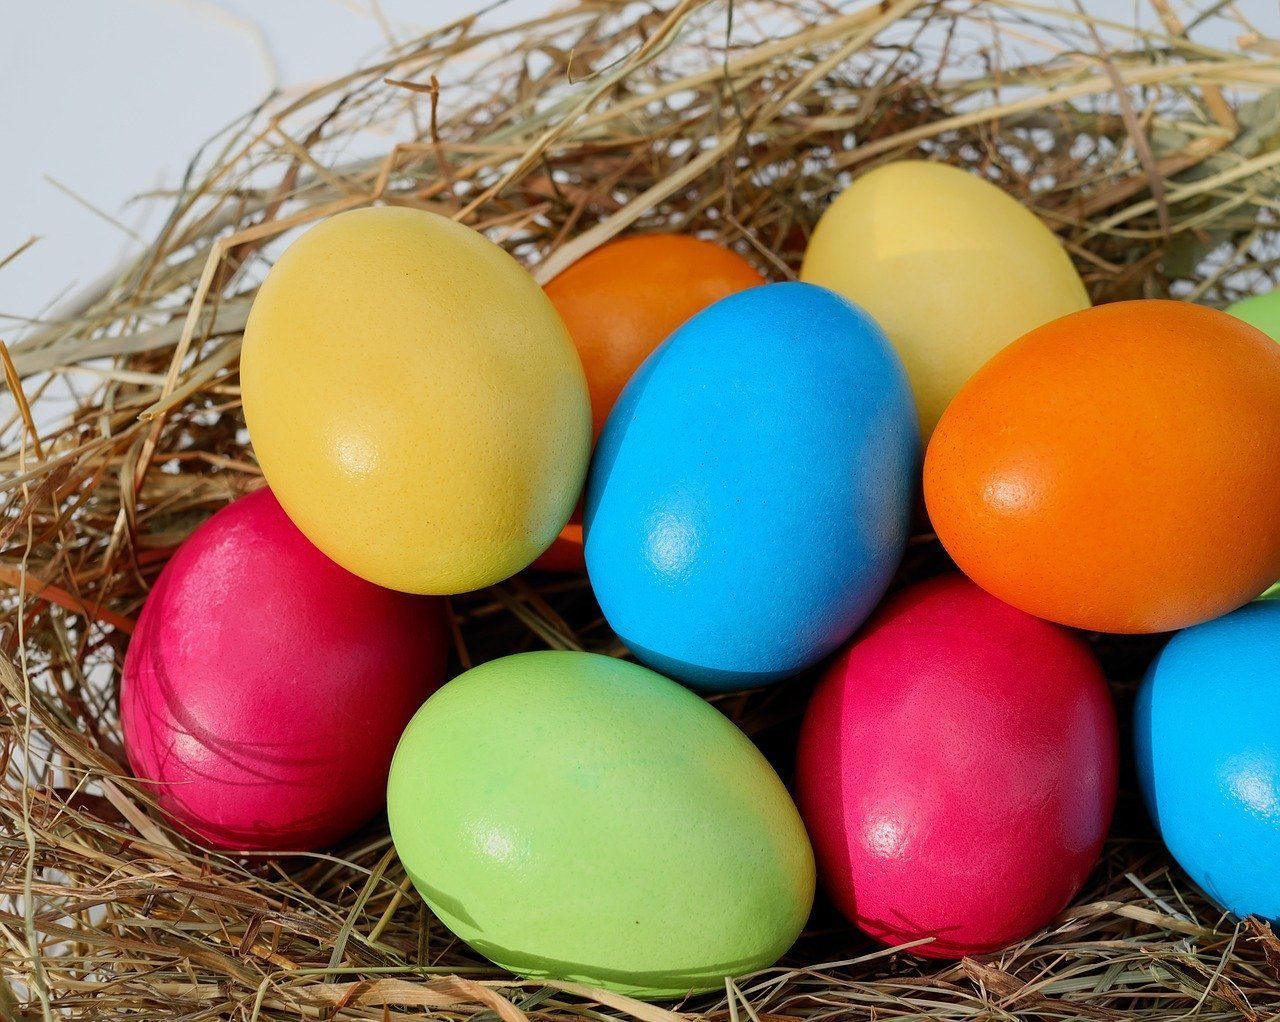 Easter traditions throughout Europe